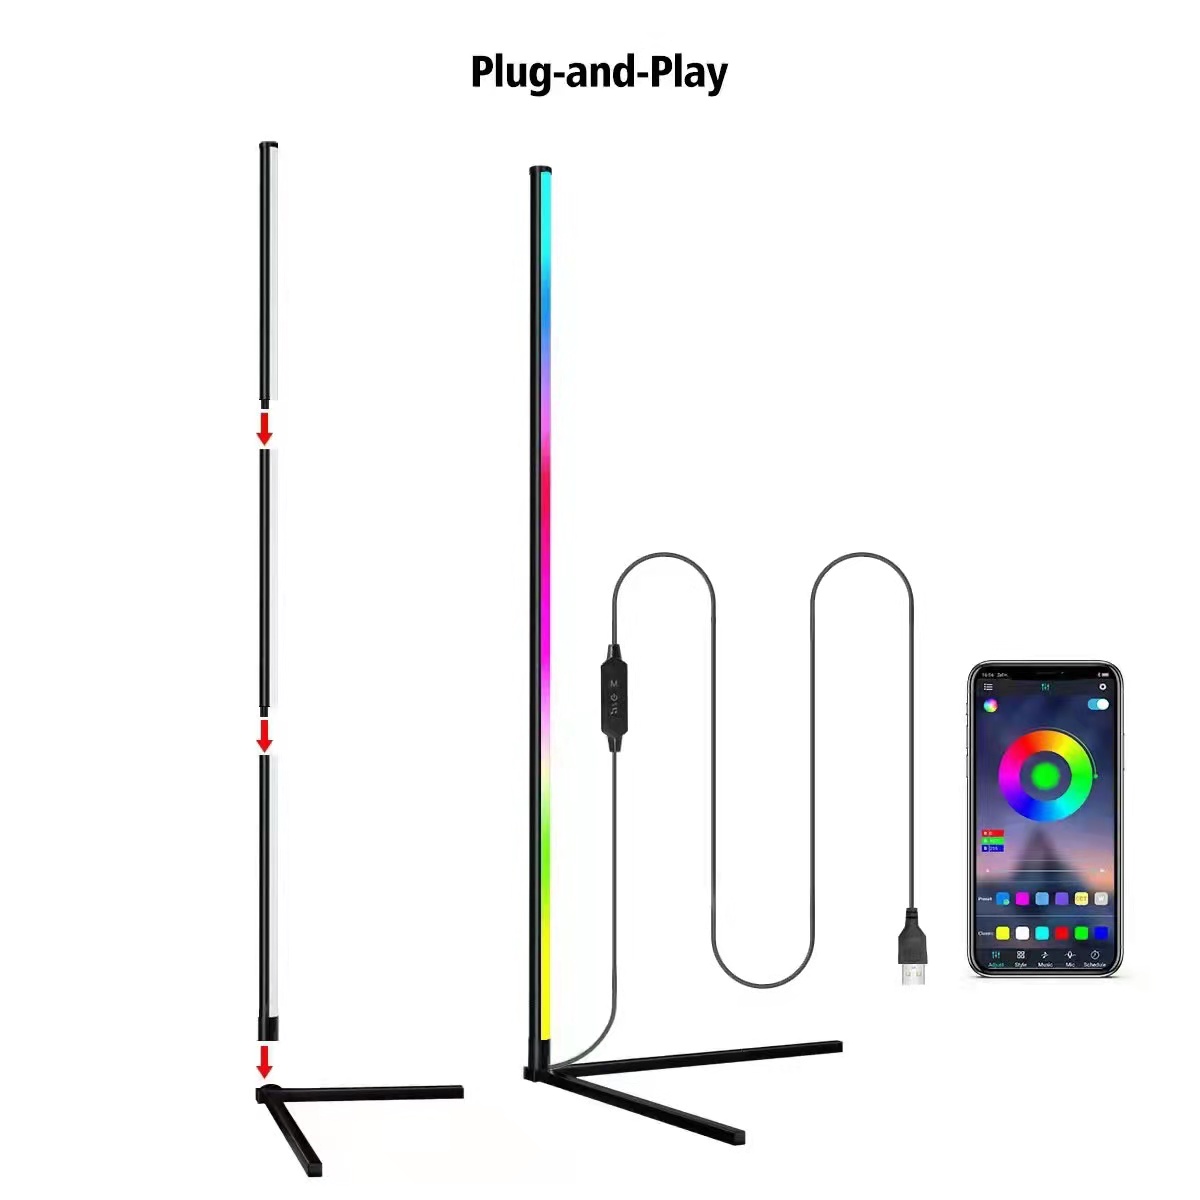 VCAN Remote Control RGB LED Floor Lamp